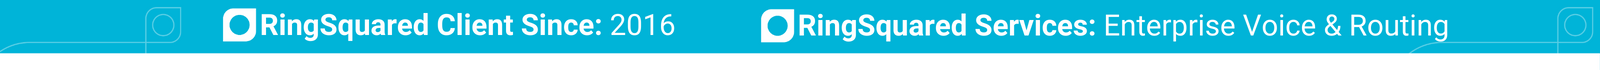 RingSquared Case Study - Client since 2016